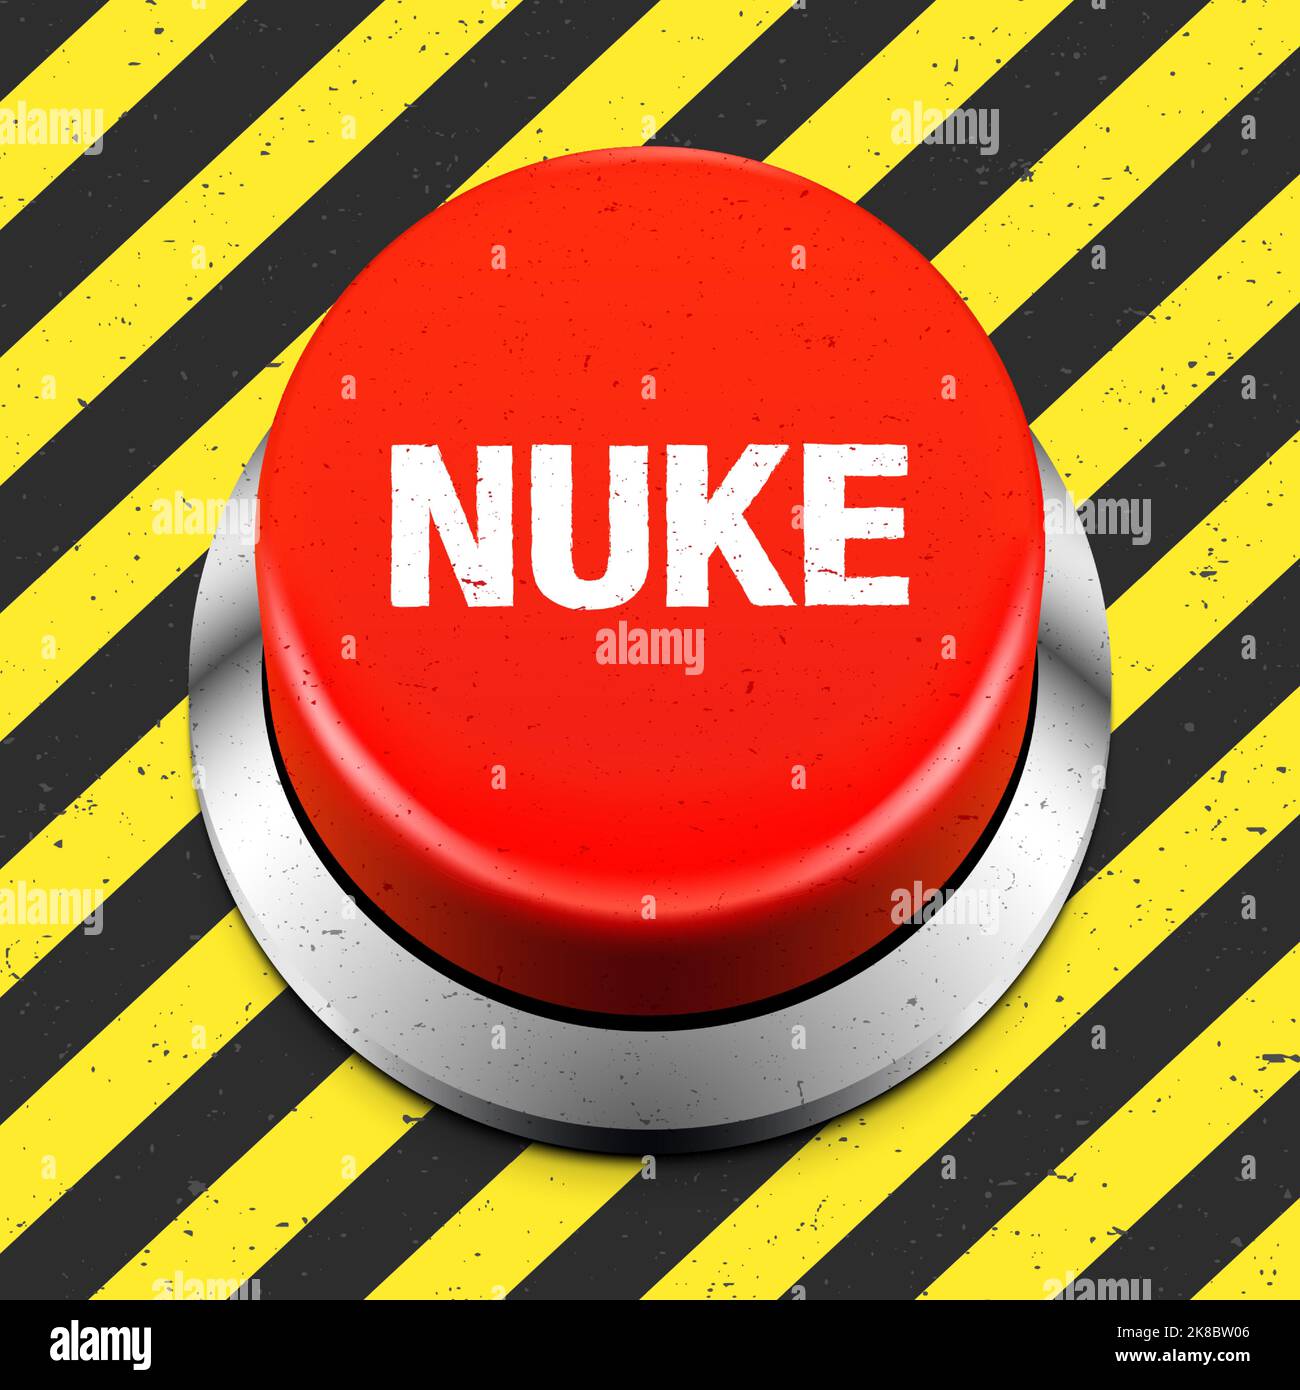 Do Not Press Red Button Stock Photo - Alamy